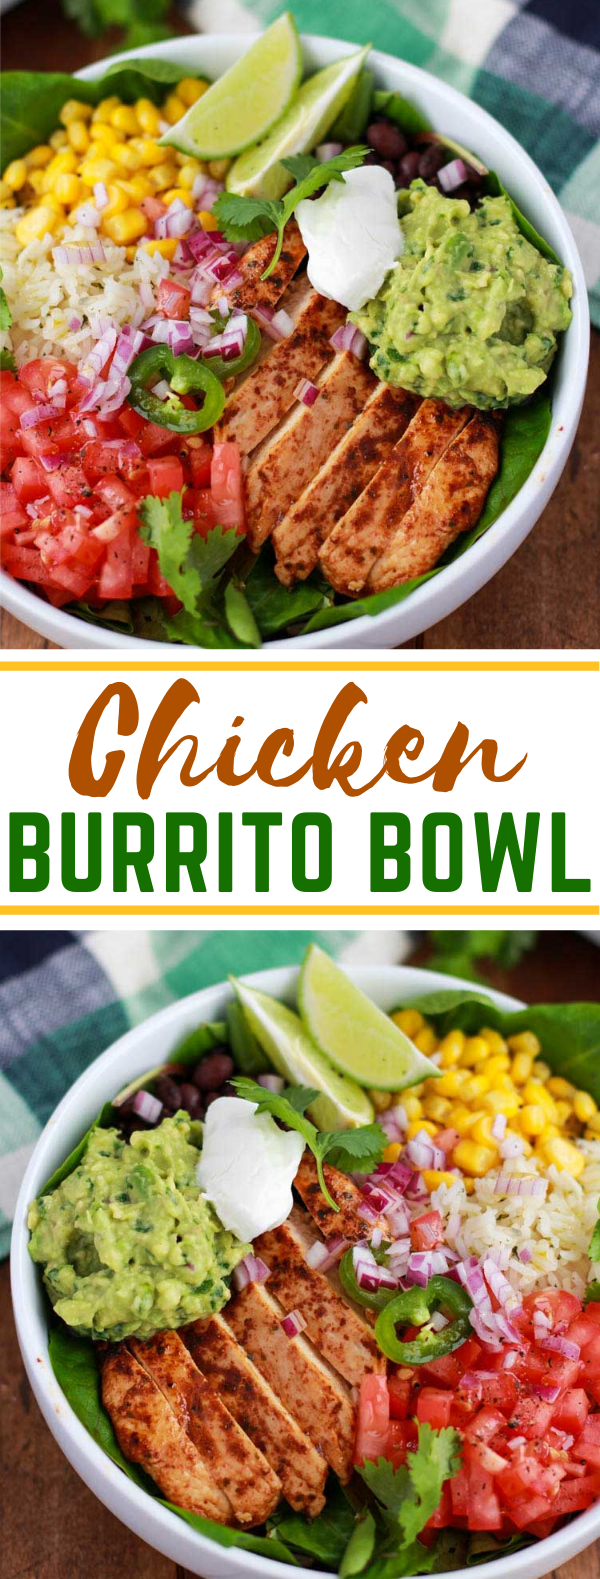 Chicken Burrito Bowl #mexicanstyle #lunch